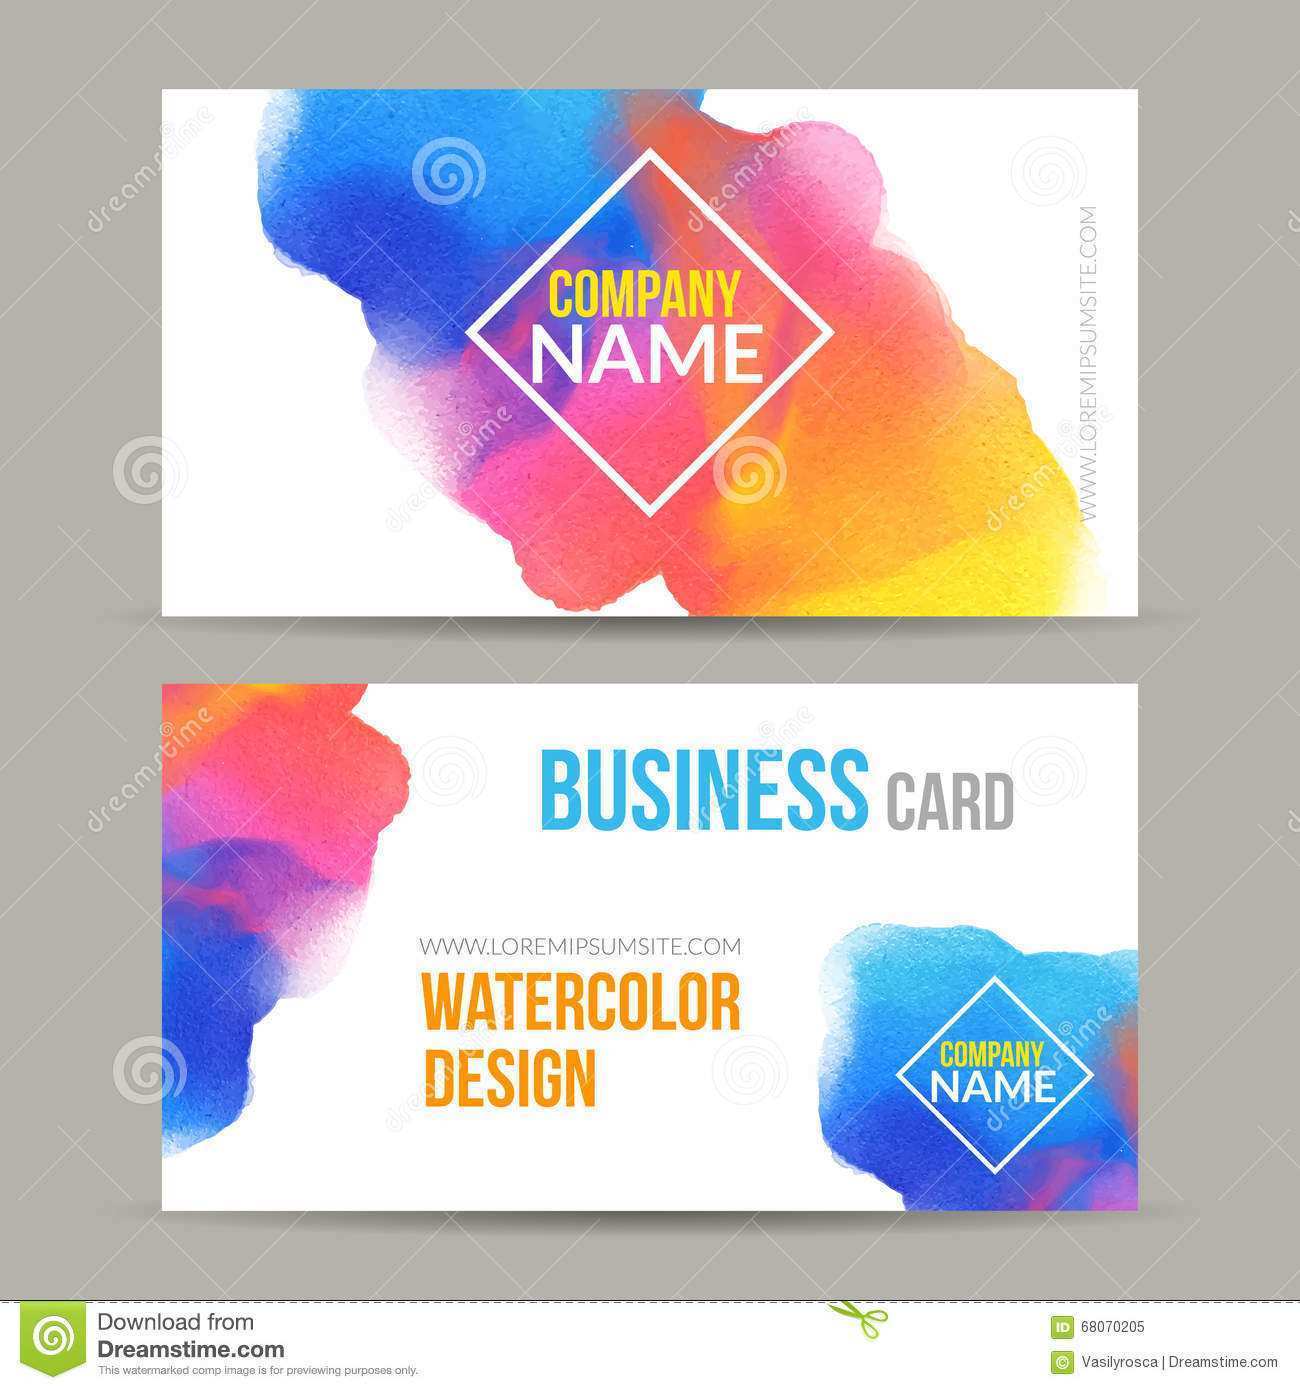 94 Visiting Business Card Template Paint Net Now by Business Card Template Paint Net